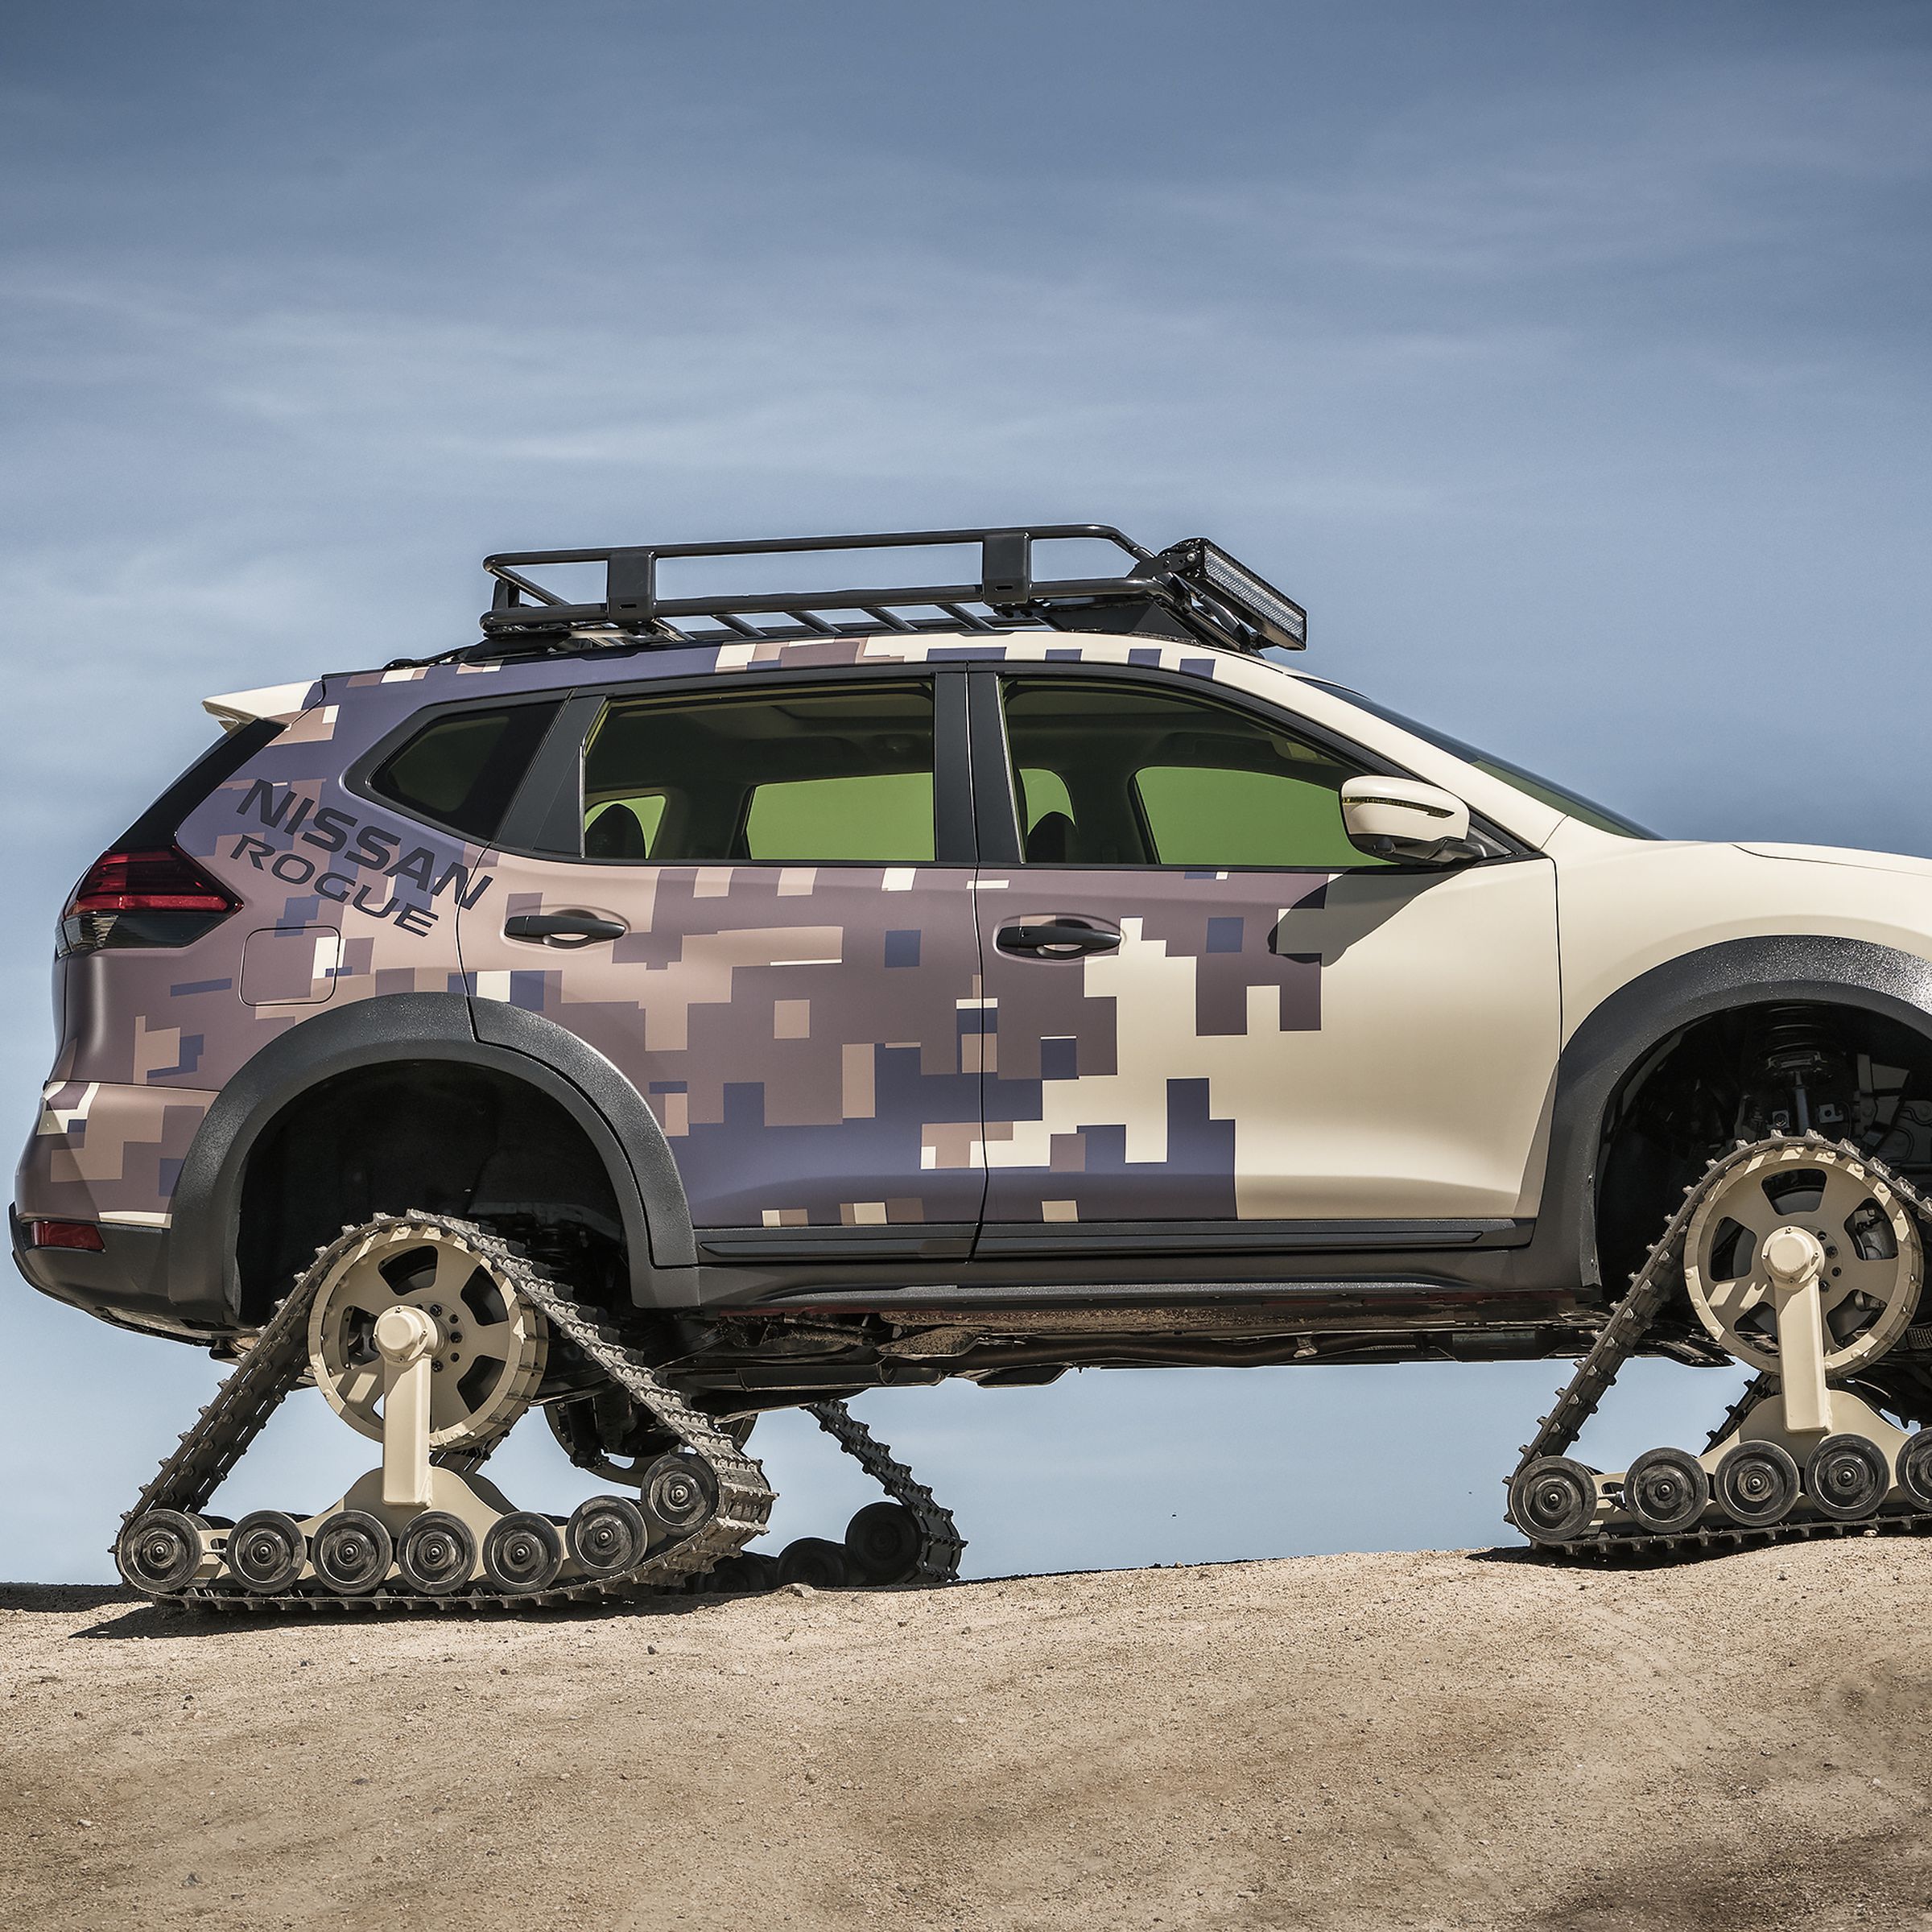 A nissan rogue with tank treads for wheels